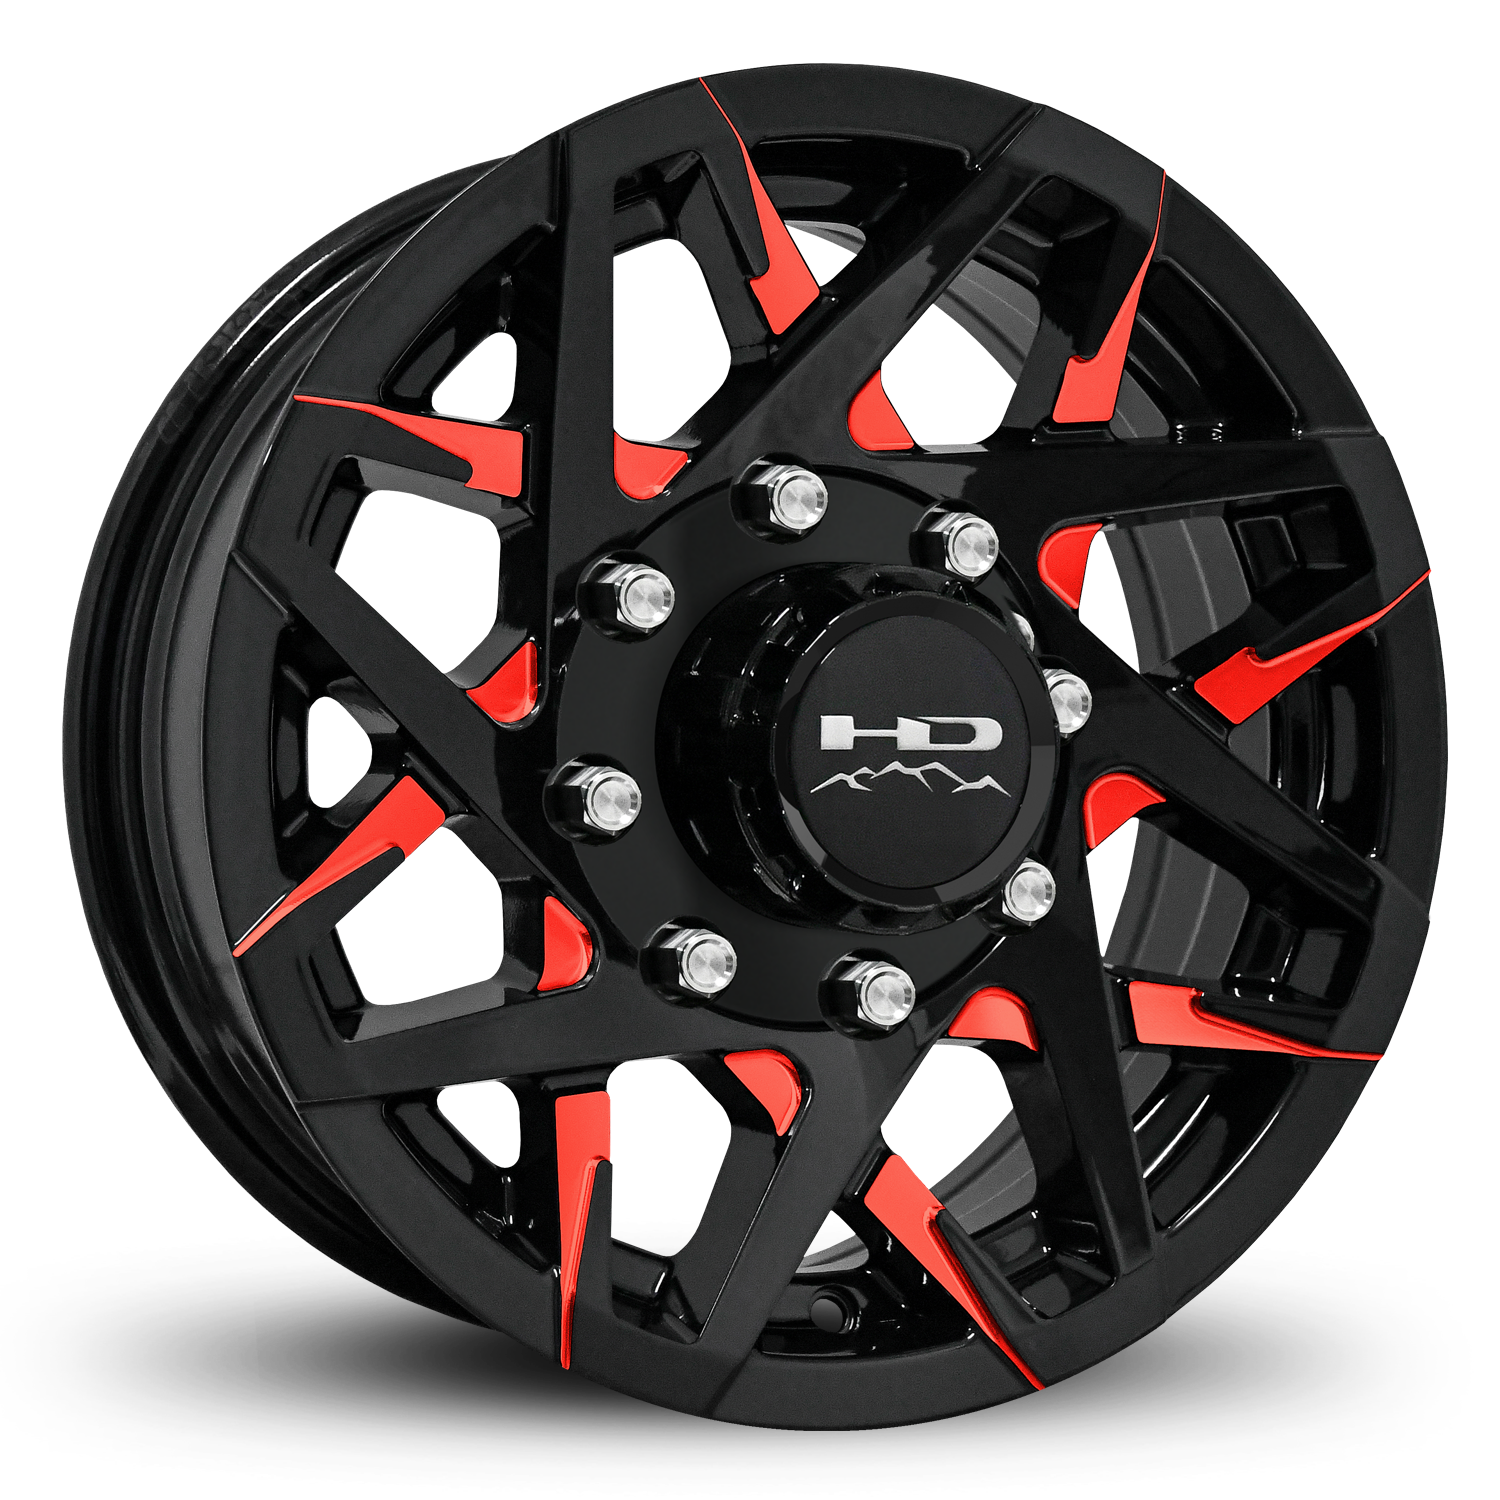 HD Off-Road Canyon Red Custom Trailer Wheel Rims in 16x6.0 16x6 Gloss Black CNC Milled Face Spokes with Center Cap & Logo fits 8x6.50 / 8x165 Axle Boat, Car, RV, Travel, Concession, Horse, Utility, Lawn & Garden, & Landscaping.